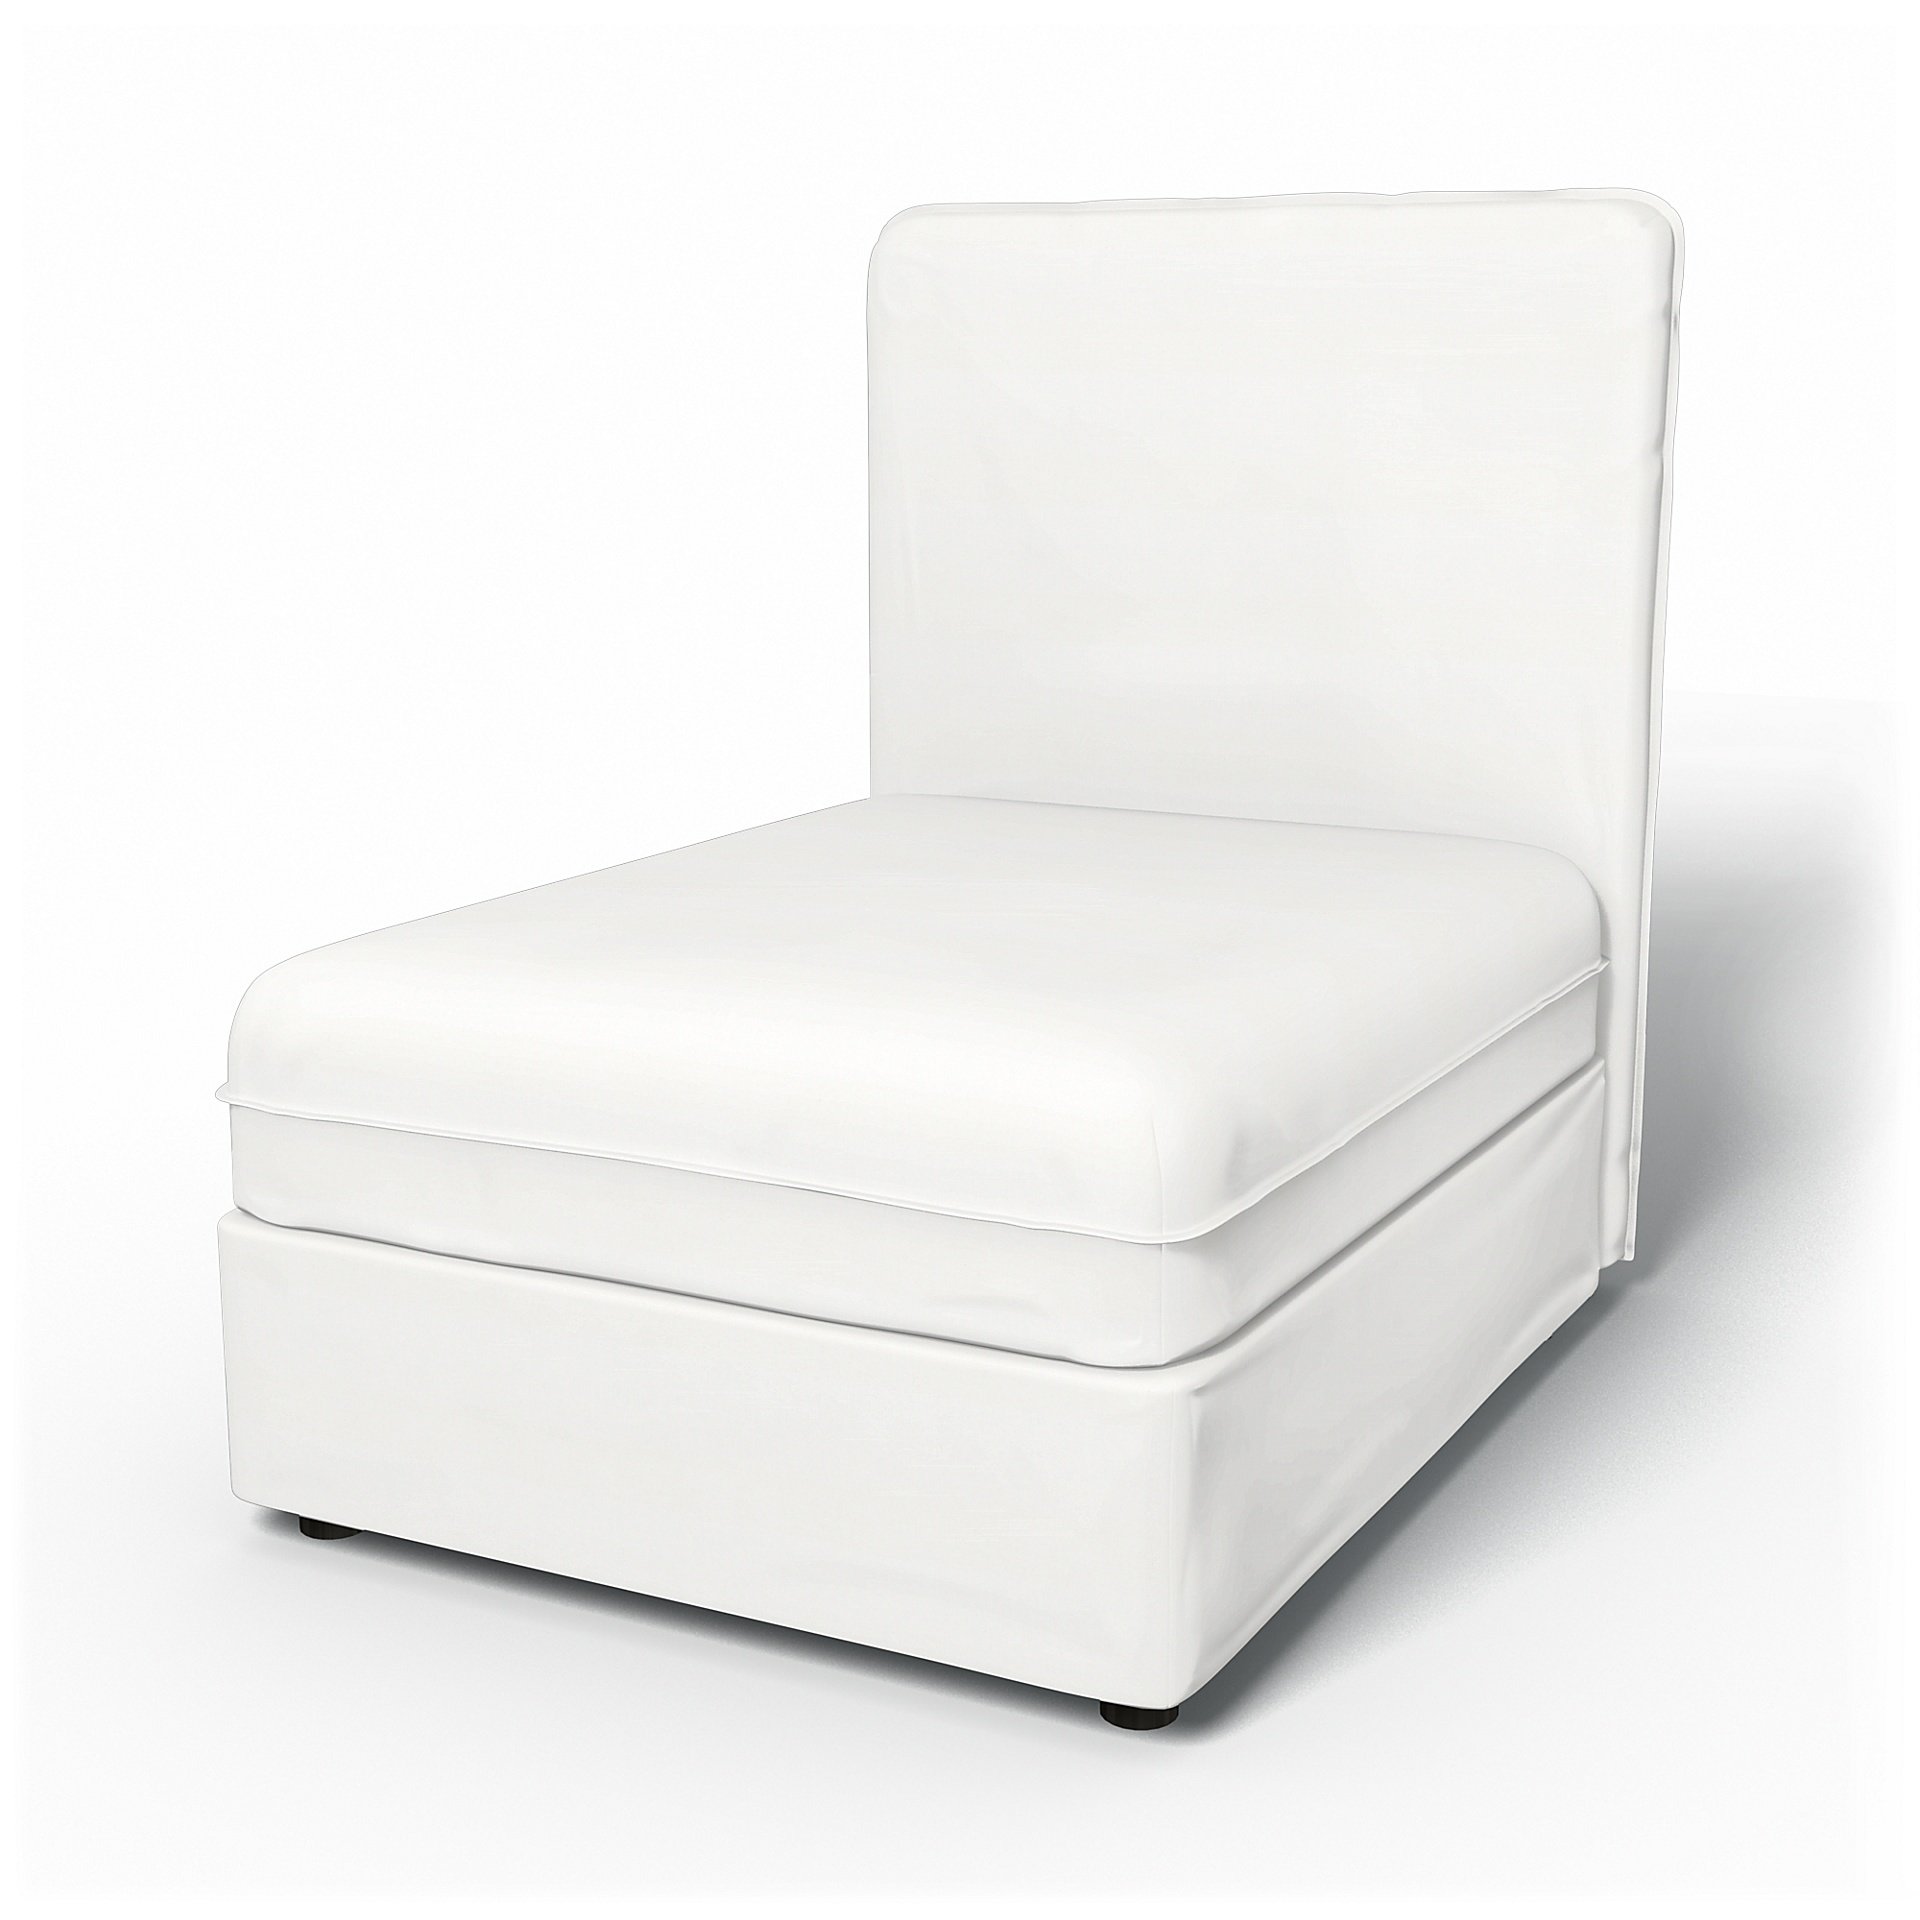 IKEA - Vallentuna Seat Module with High Back Cover 80x100cm 32x32in, Absolute White, Linen - Bemz